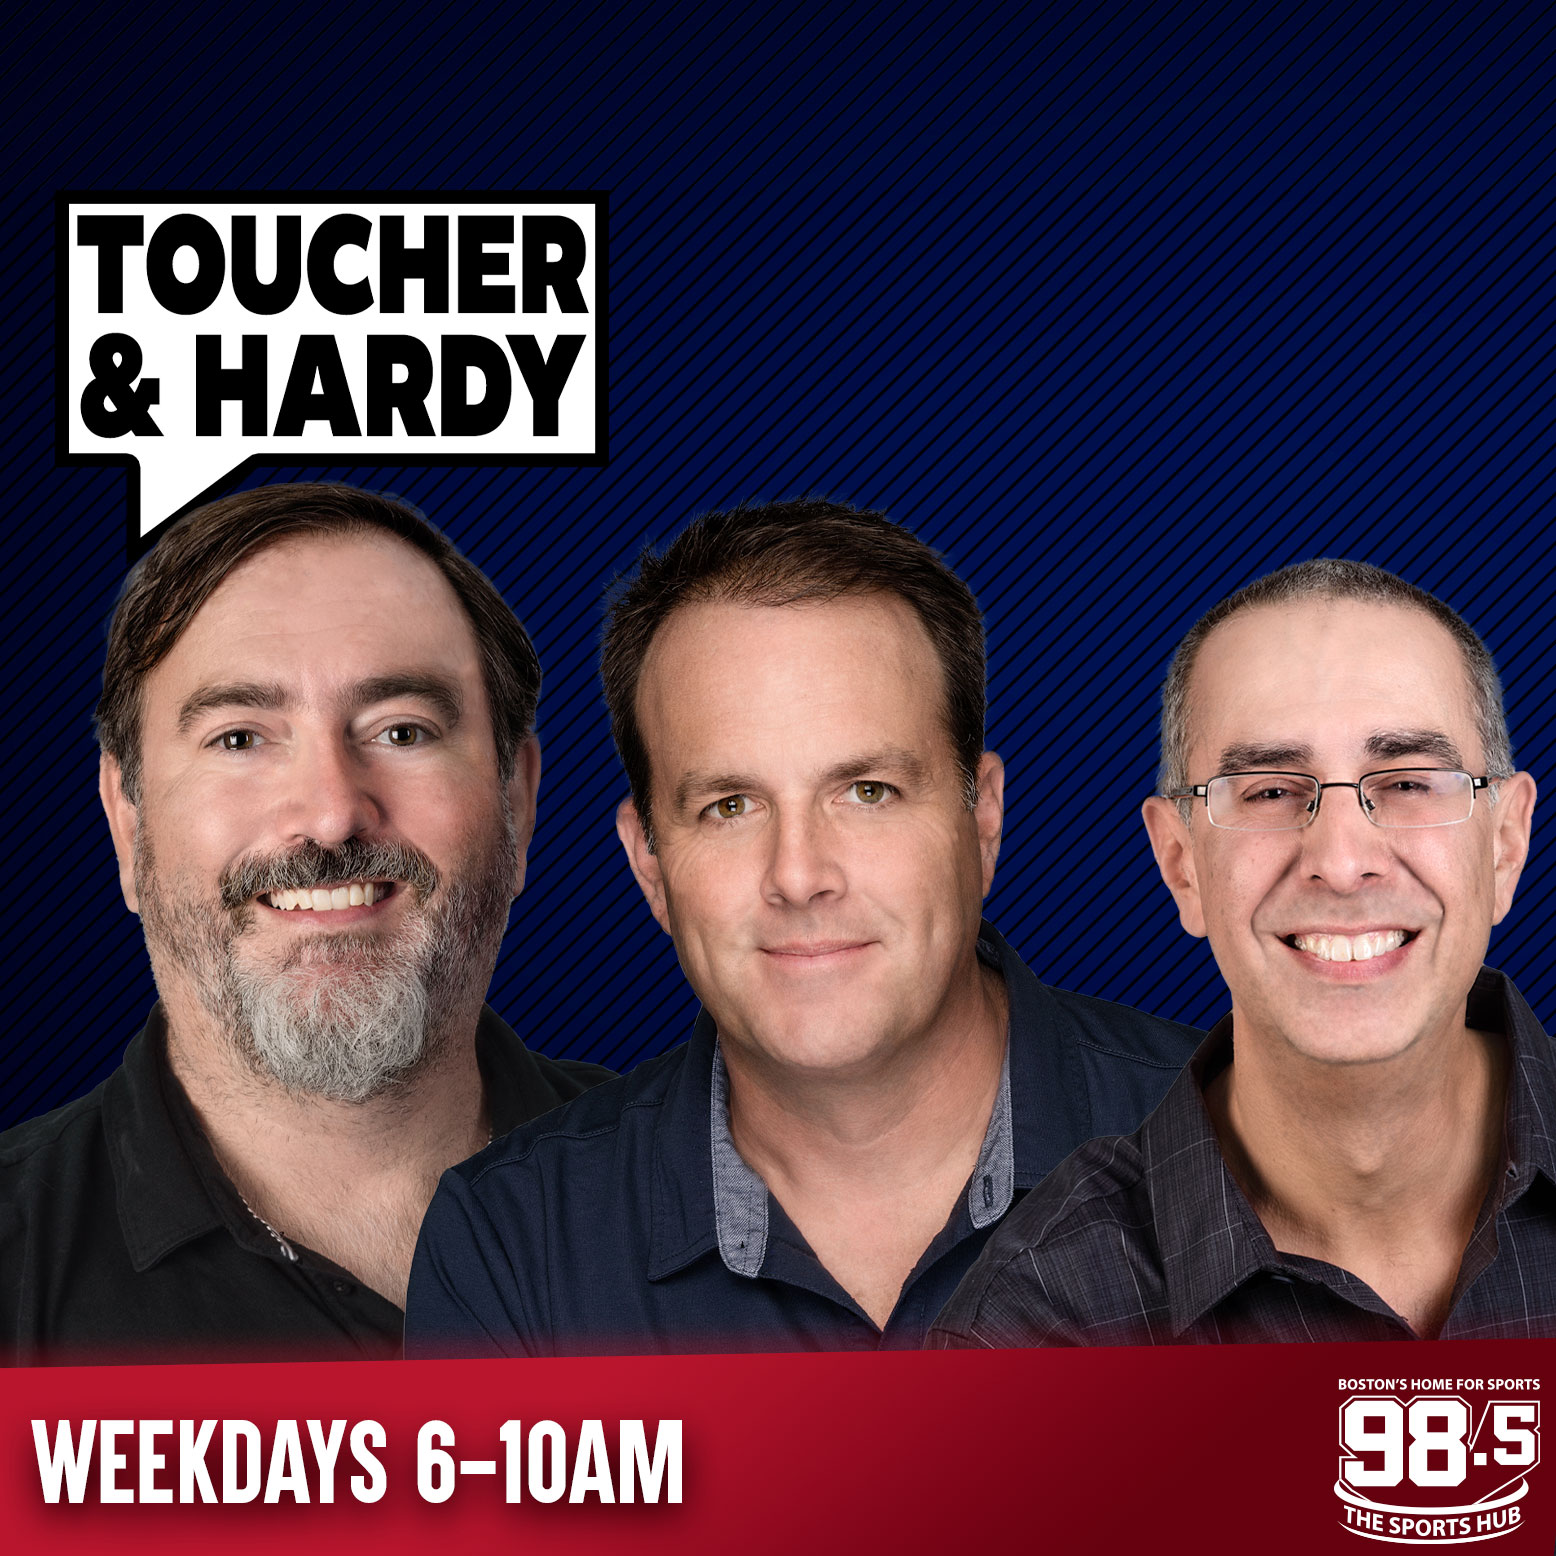 Stephen A. Smith, JJ Redick call out Perkins | Jared Weiss Joins Toucher & Rich - 6/6 (Hour 3)